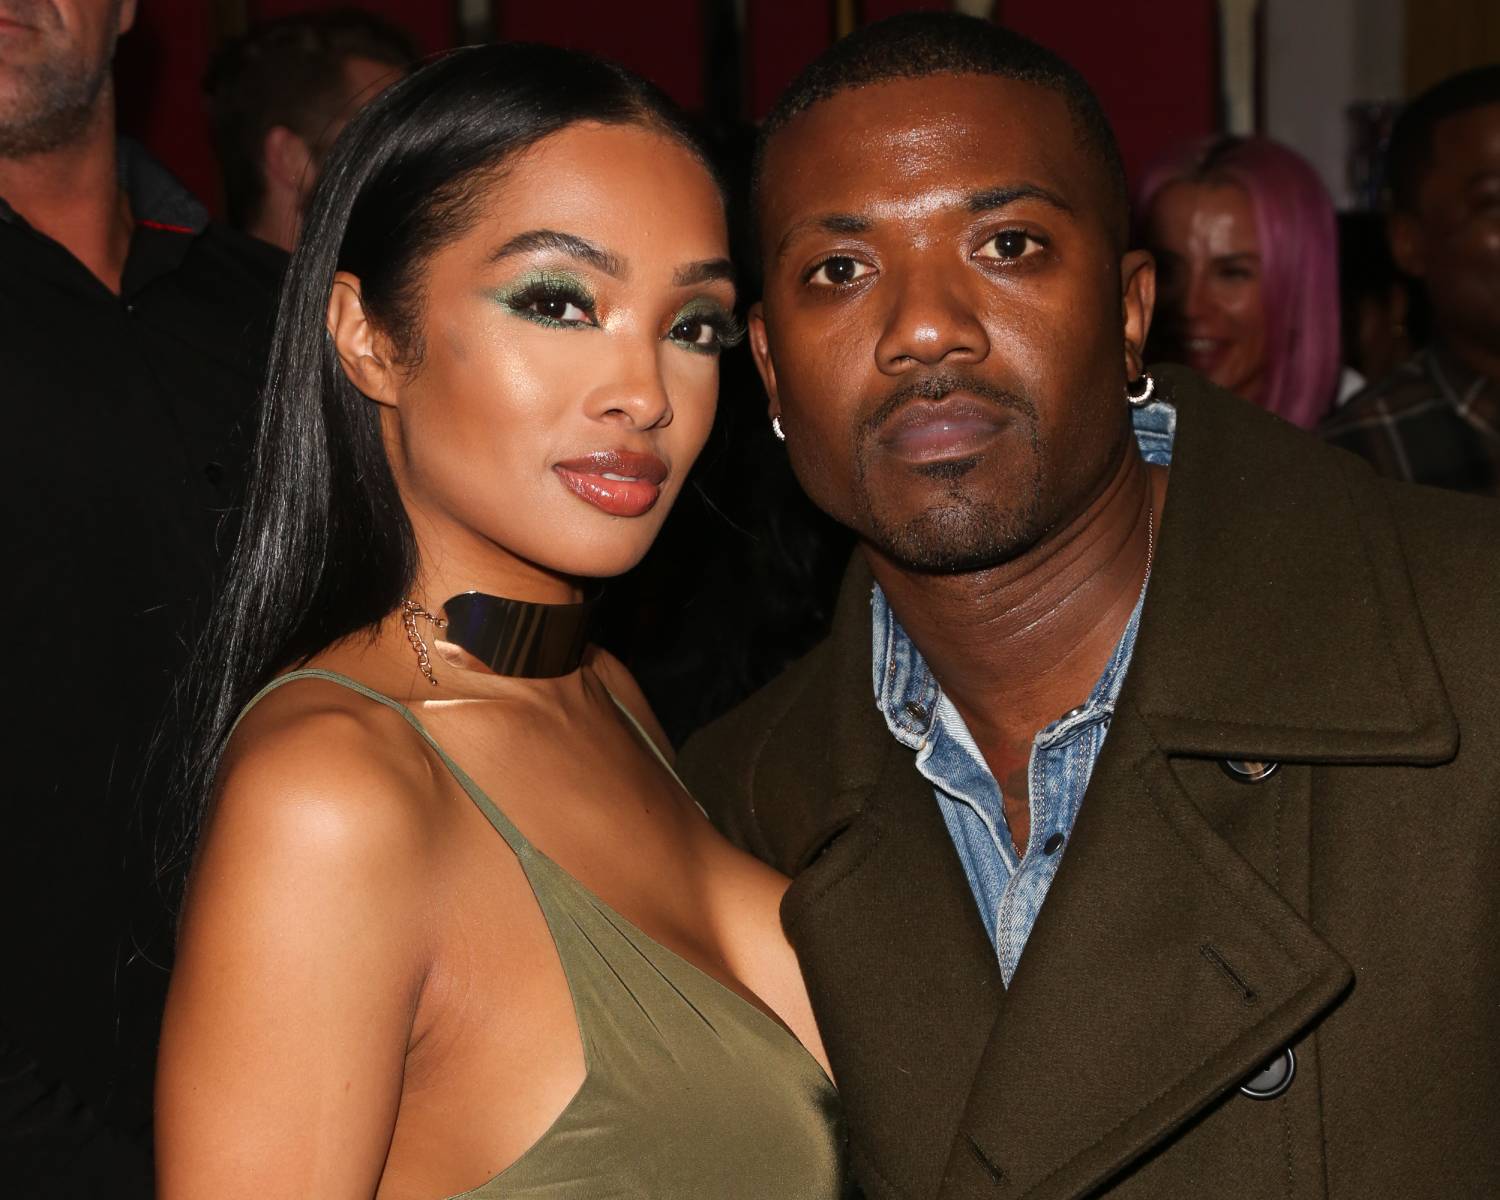  Rapper Ray J (R) and his Wife Princess Love (L) attend Tyga's Birthday celebration at Delilah on November 19, 2018 in West Hollywood, California